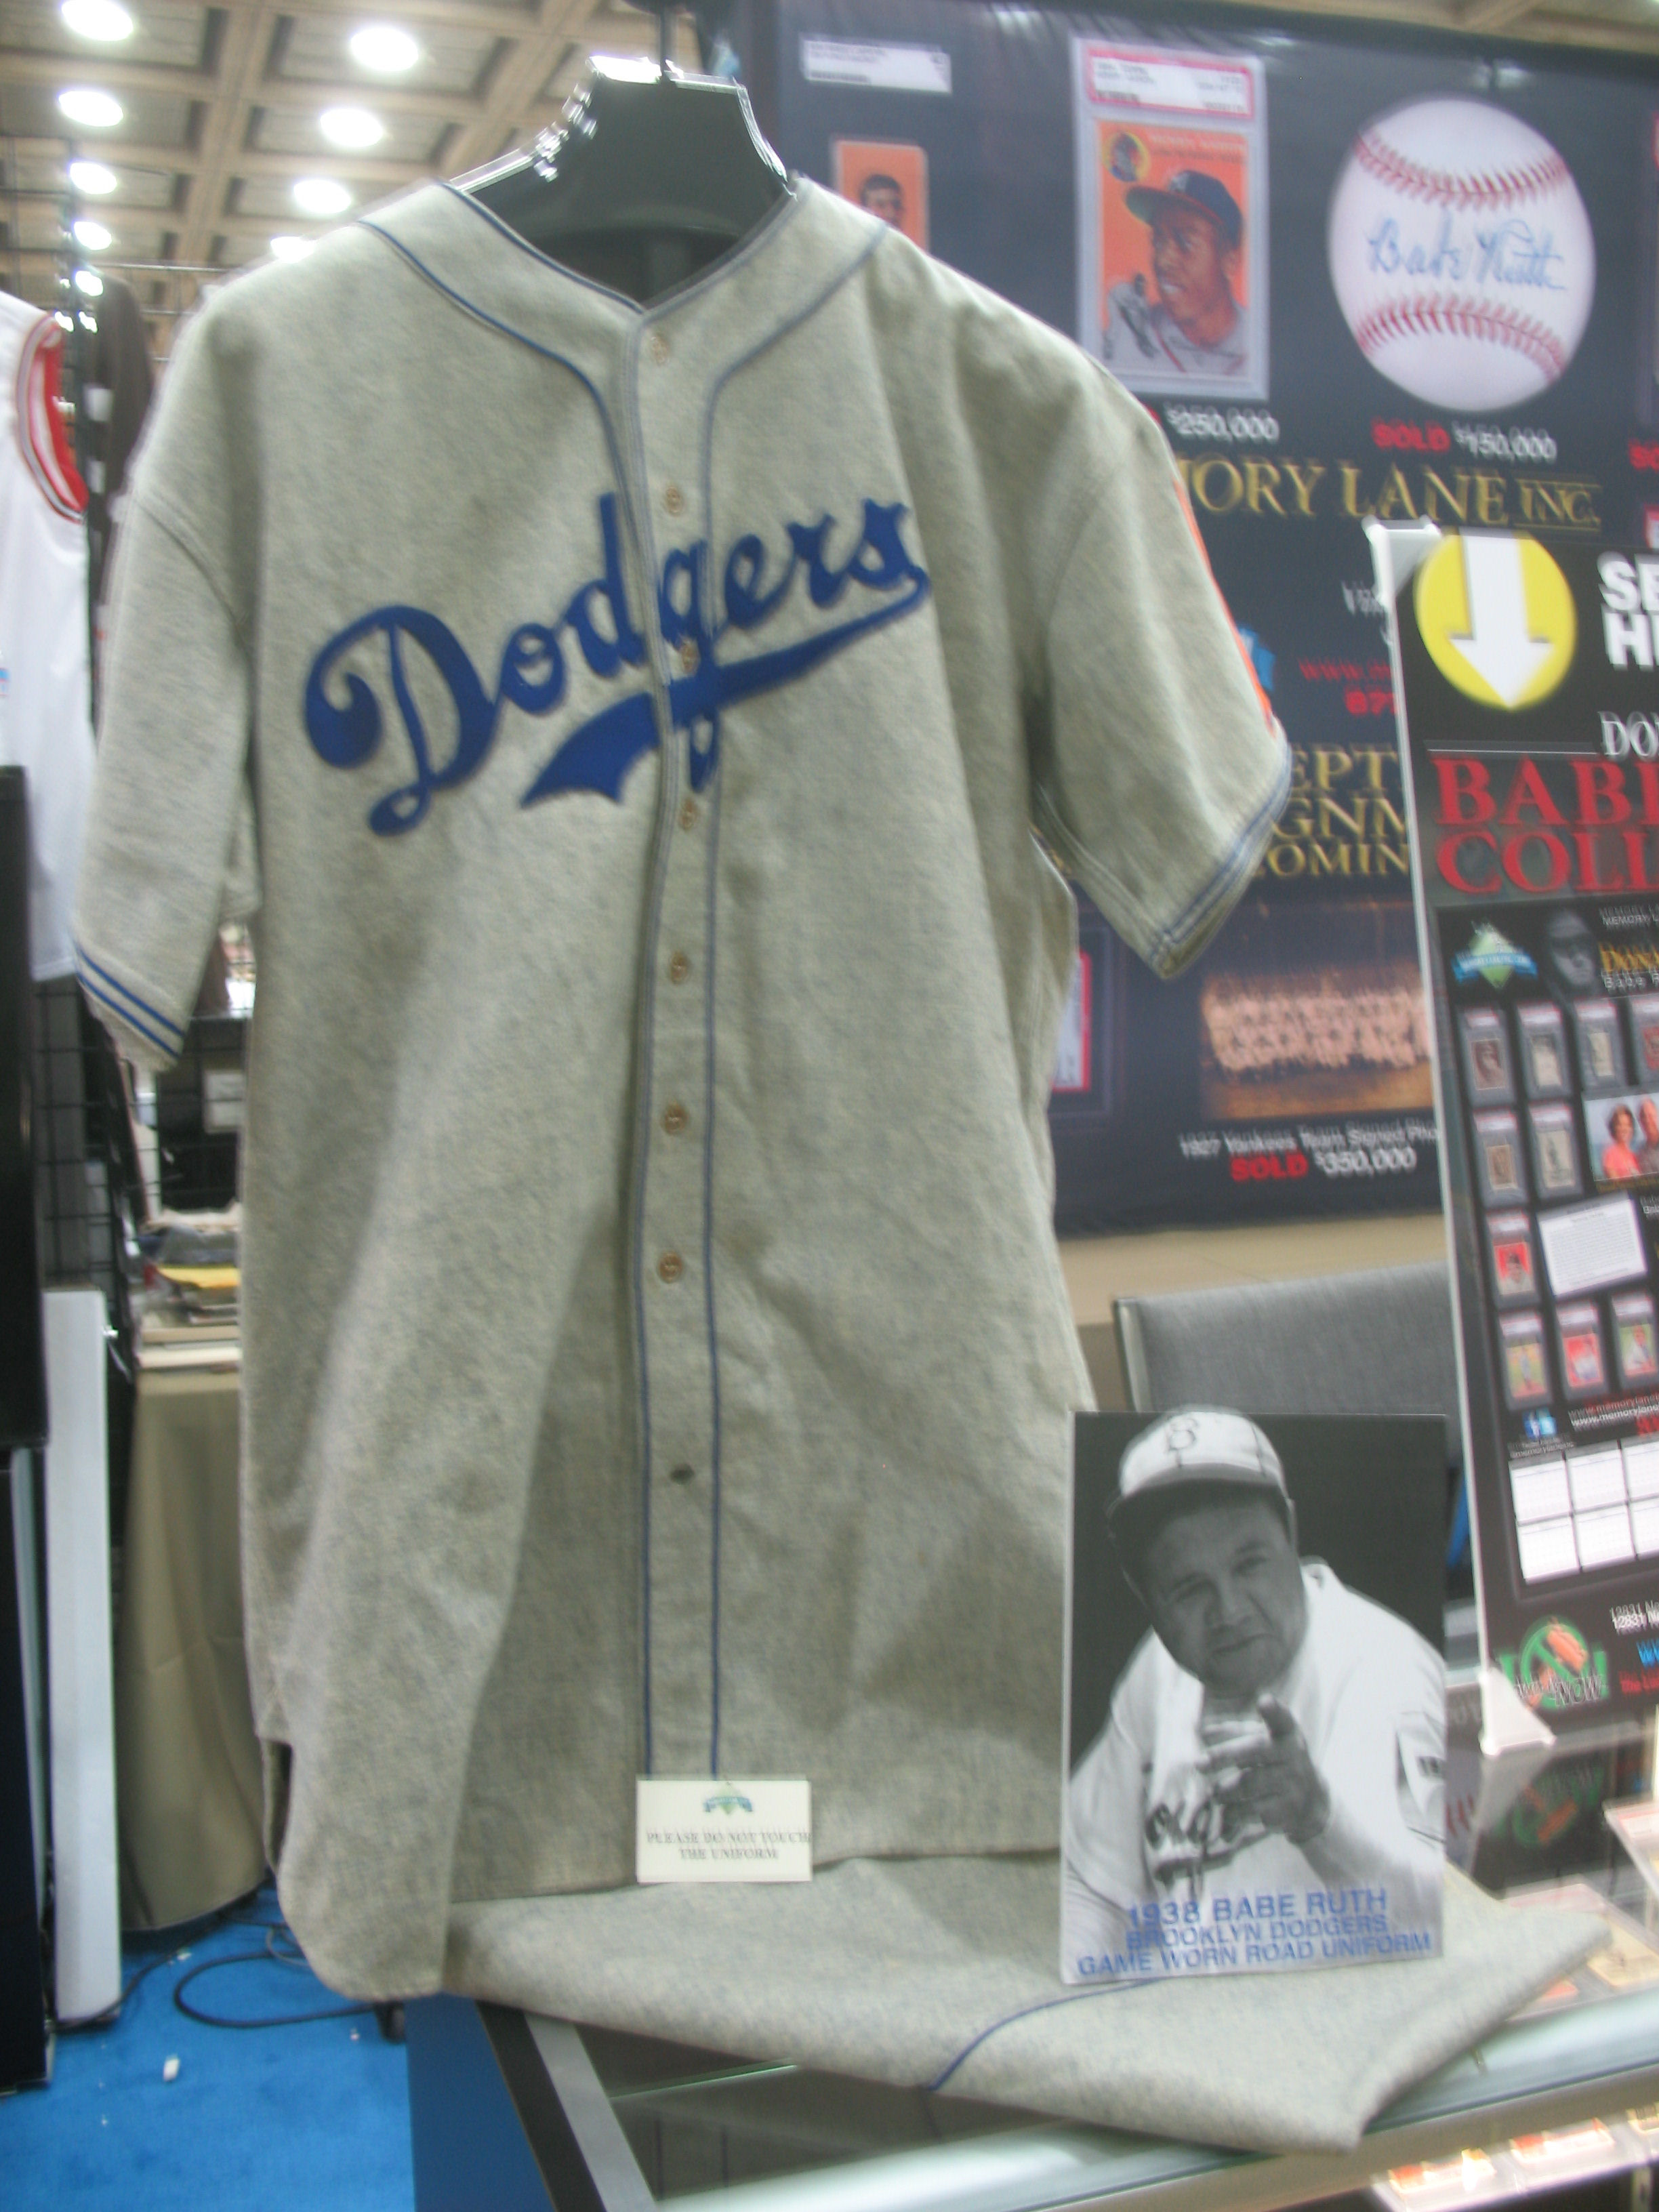 babe ruth dodgers jersey